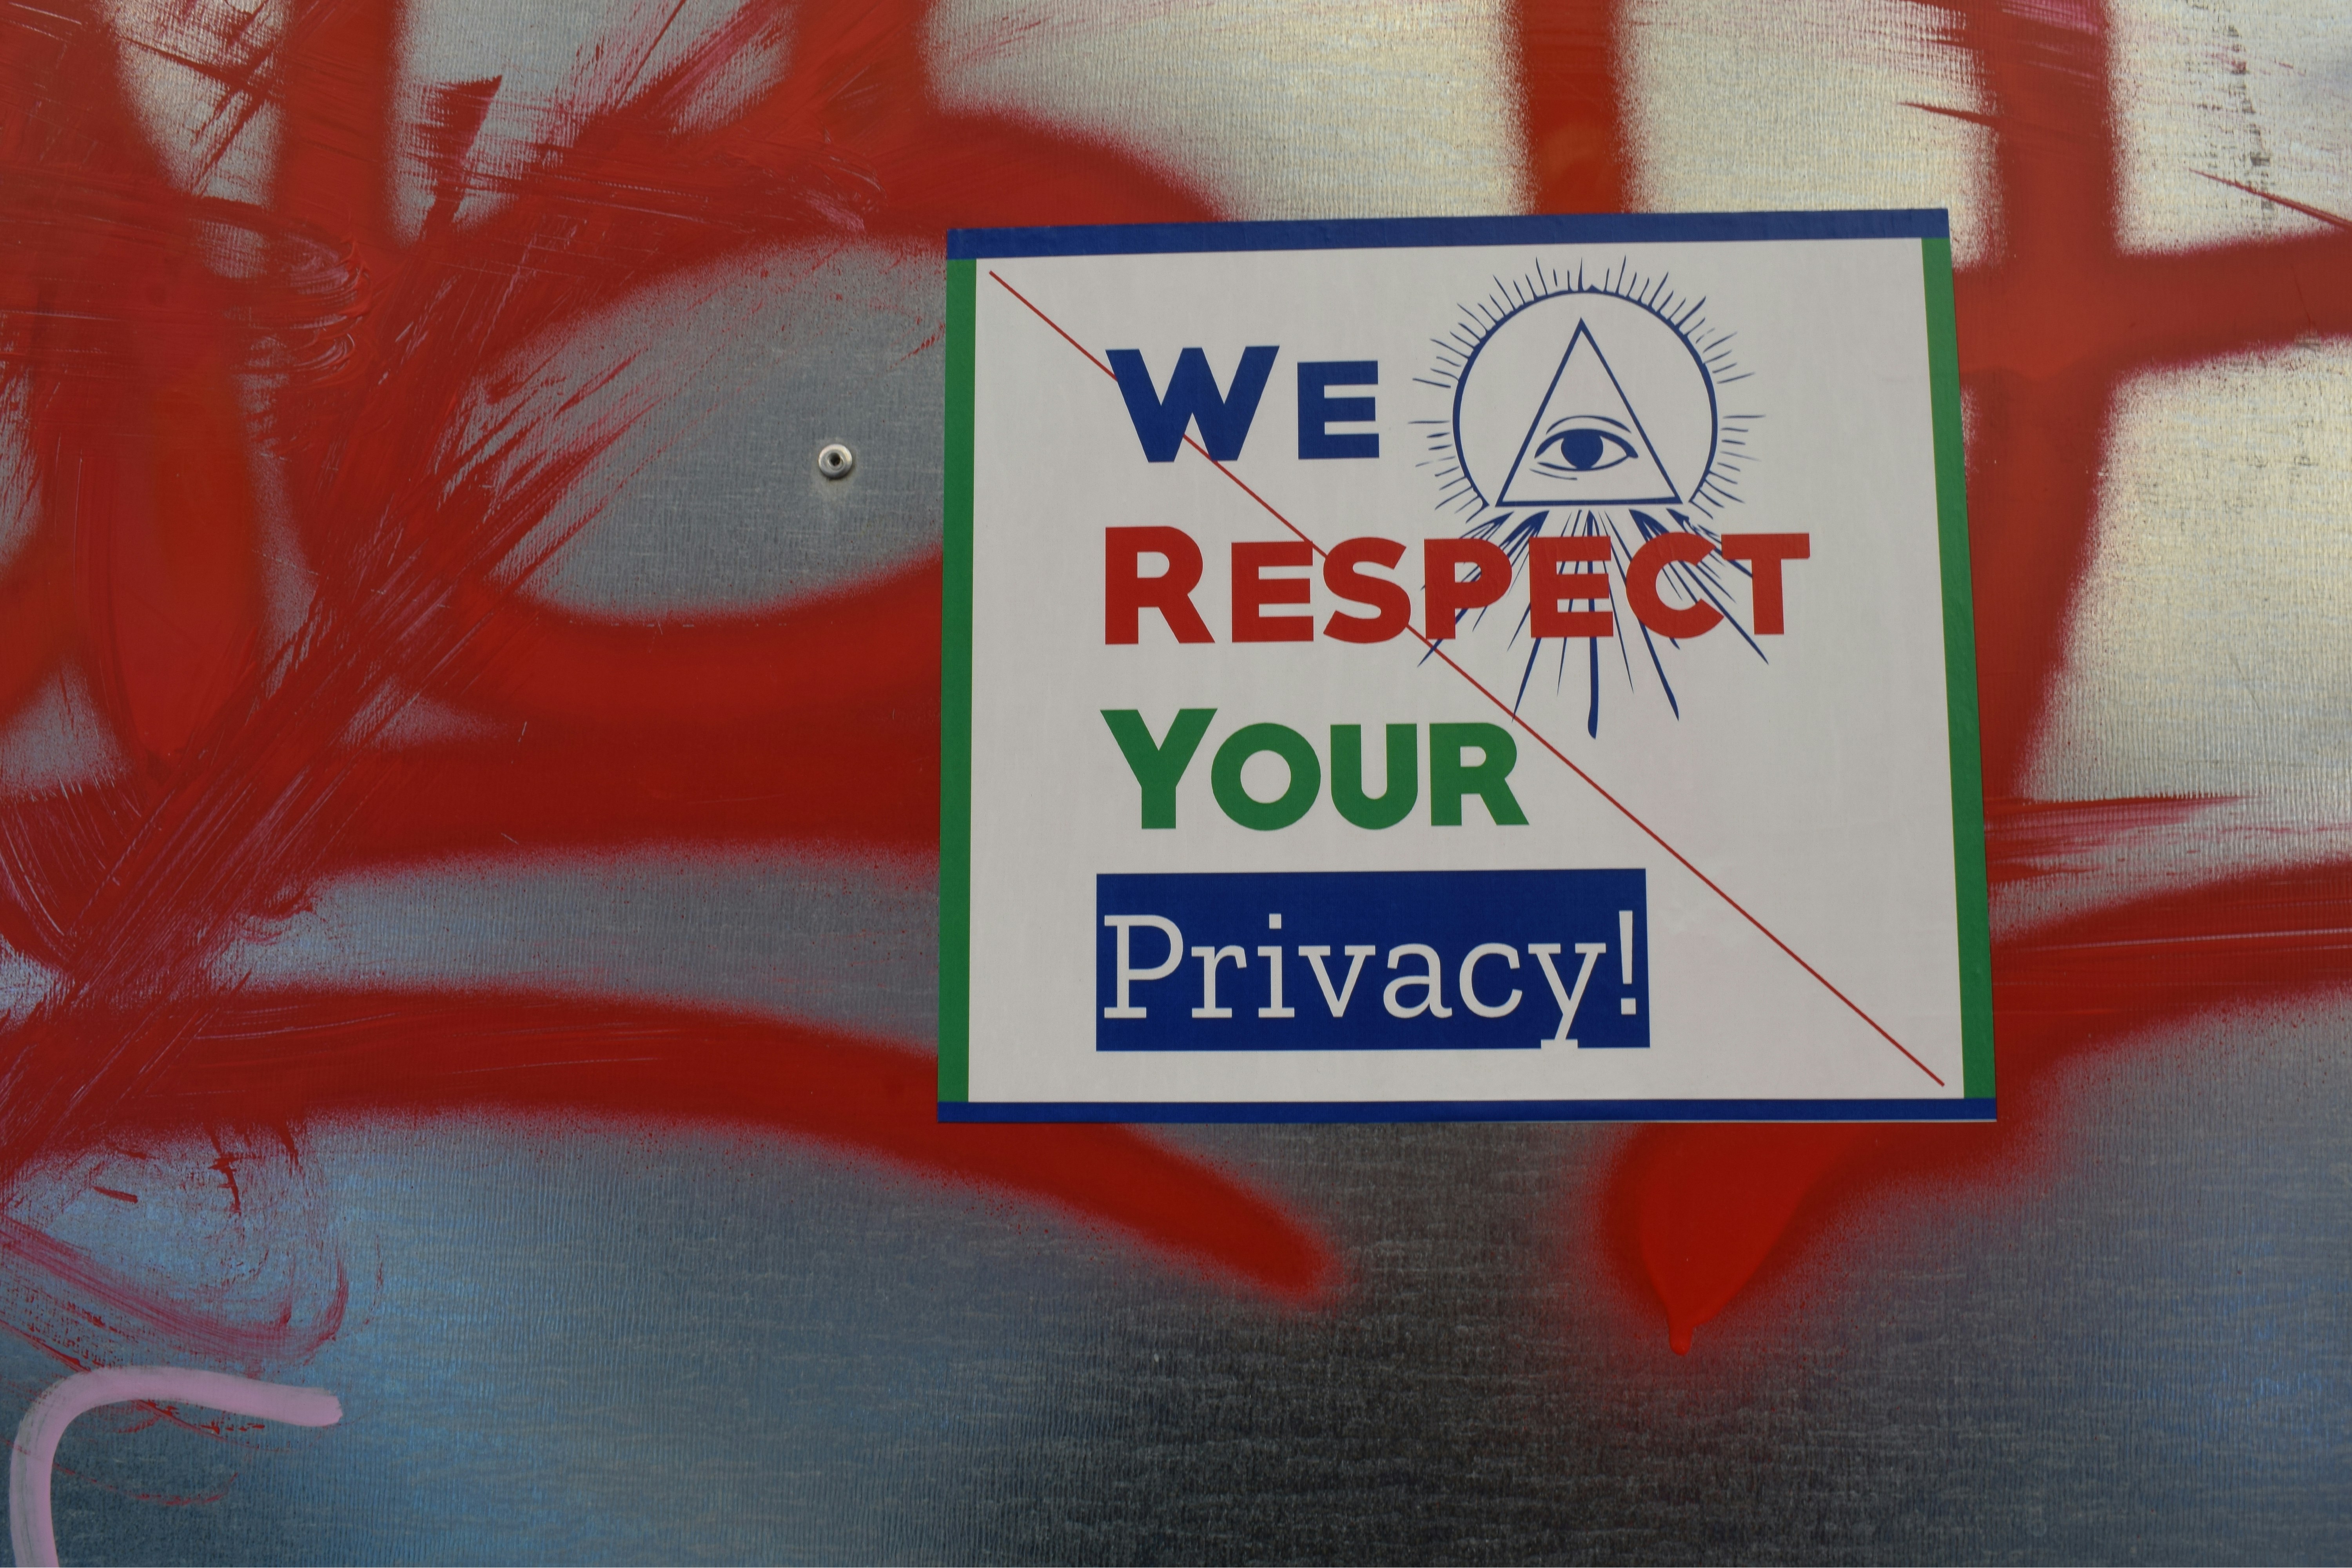 We respect your privacy.